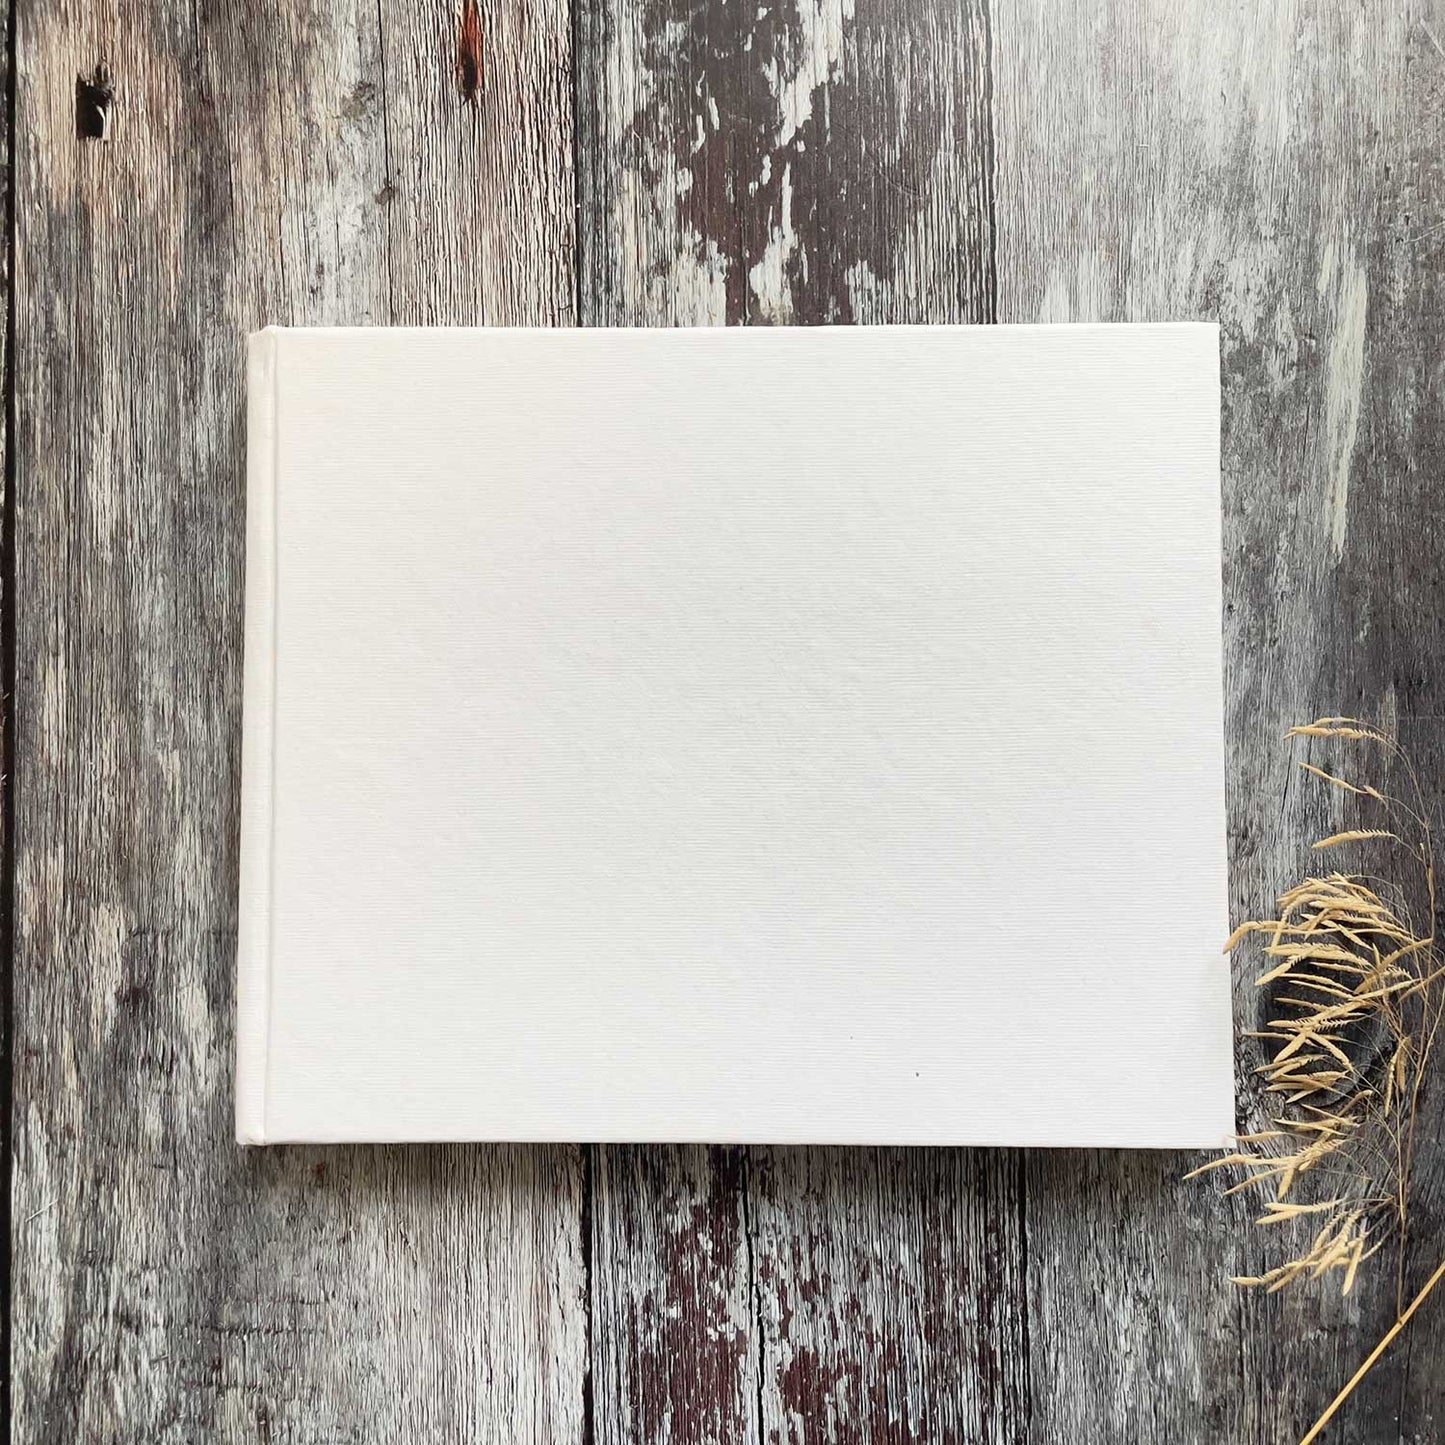 Blank guest book made from recycled paper.  Handmade cotton rag paper with deckled edges.  Hard cover with 50 pages.  Perfect for making wedding guest books, journals and personalised note books.  By The Natural Paper Company